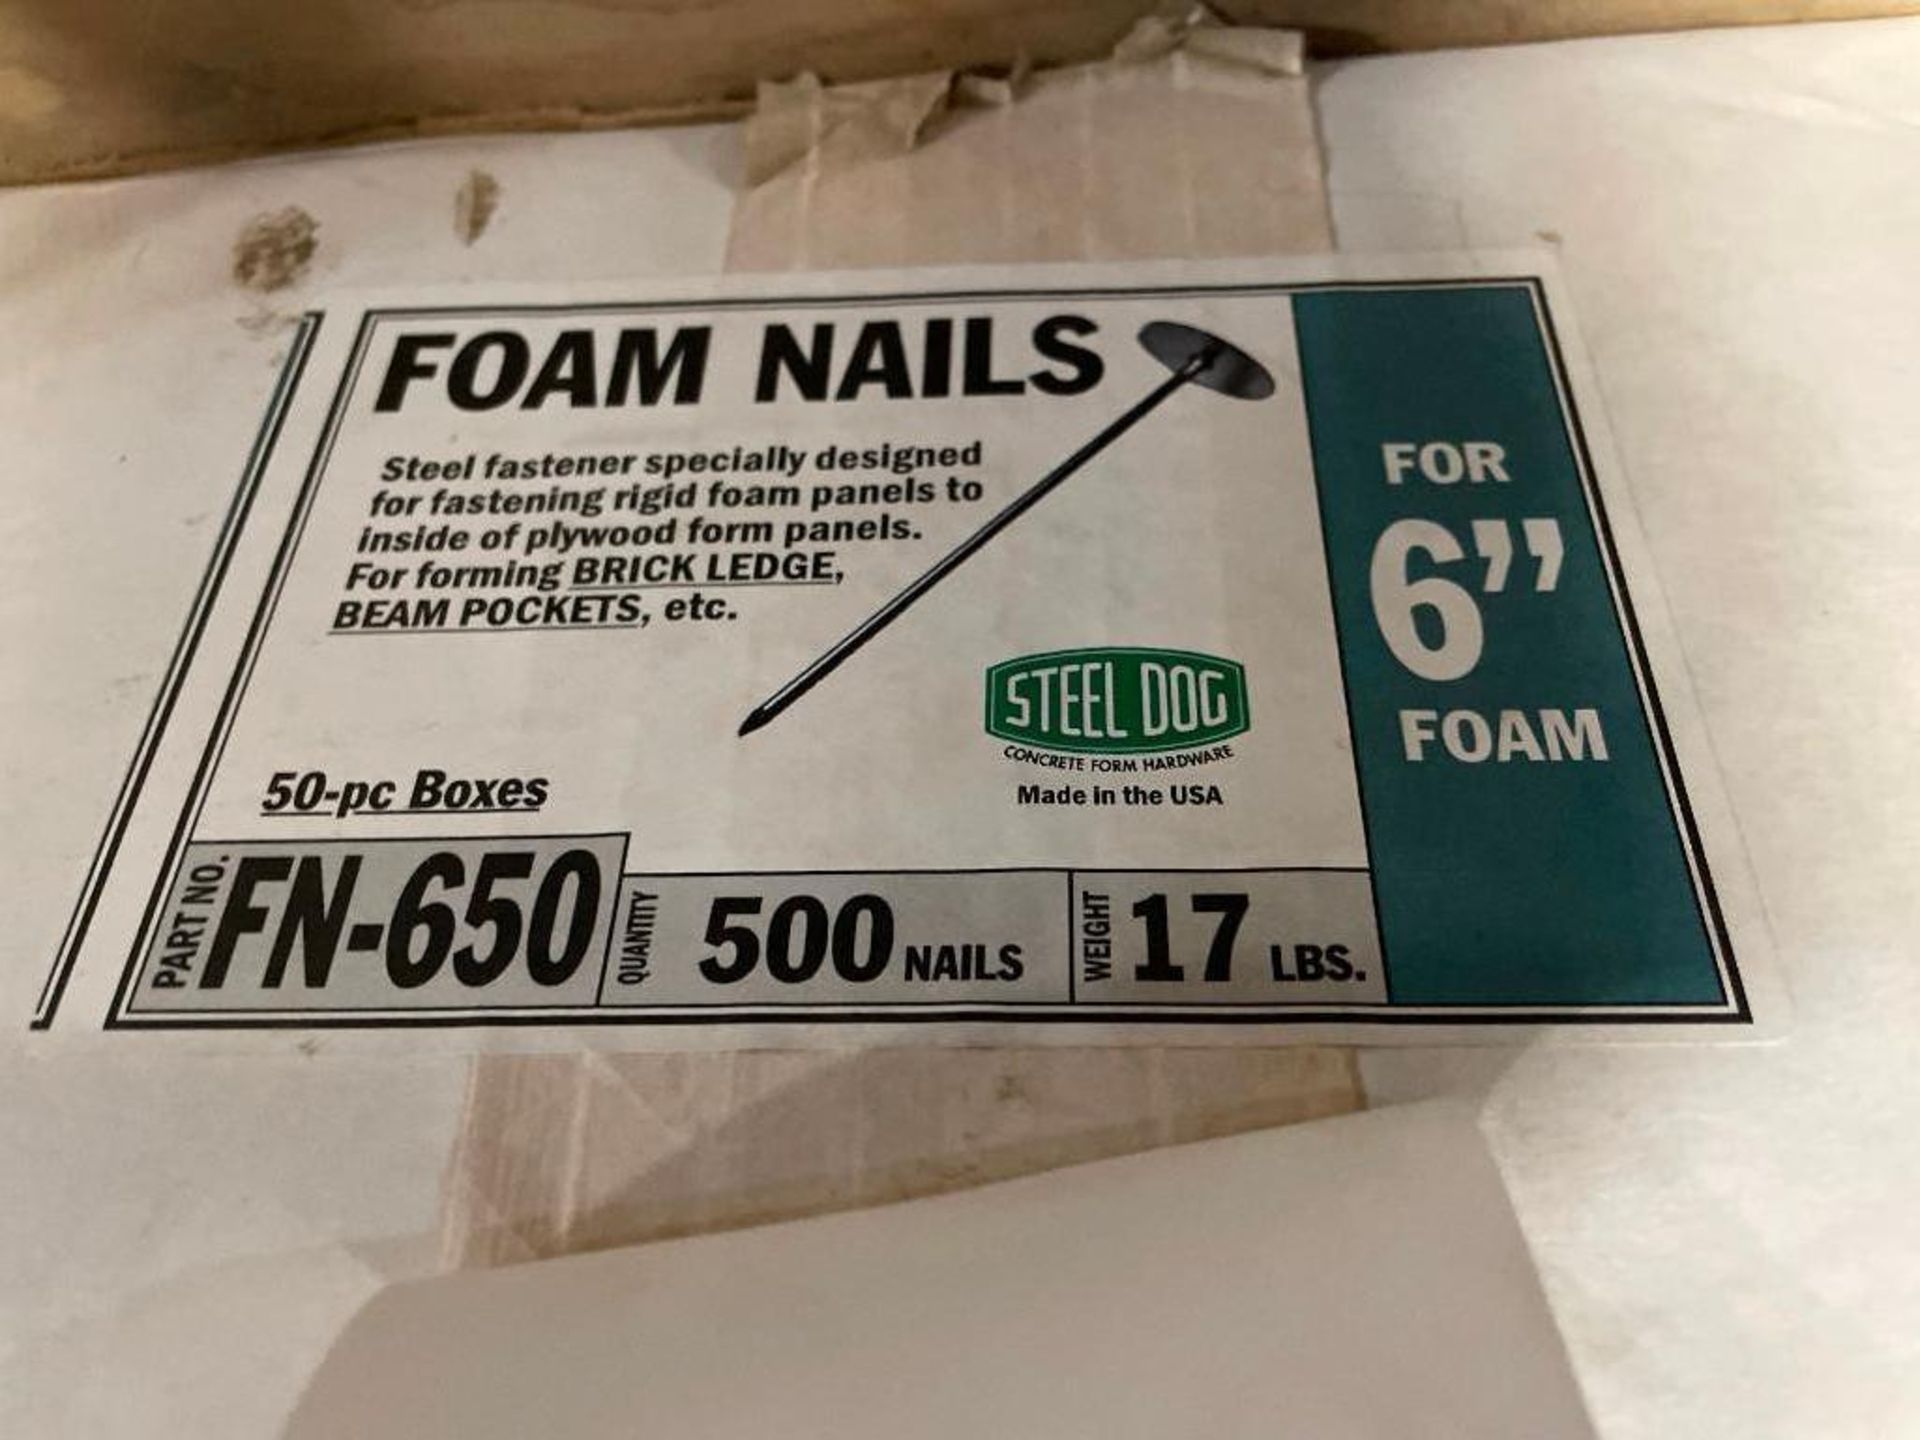 Steel Dog Foam Nails for 6" Foam, FN-650 & FN-450. Located in Hazelwood, MO - Image 2 of 2